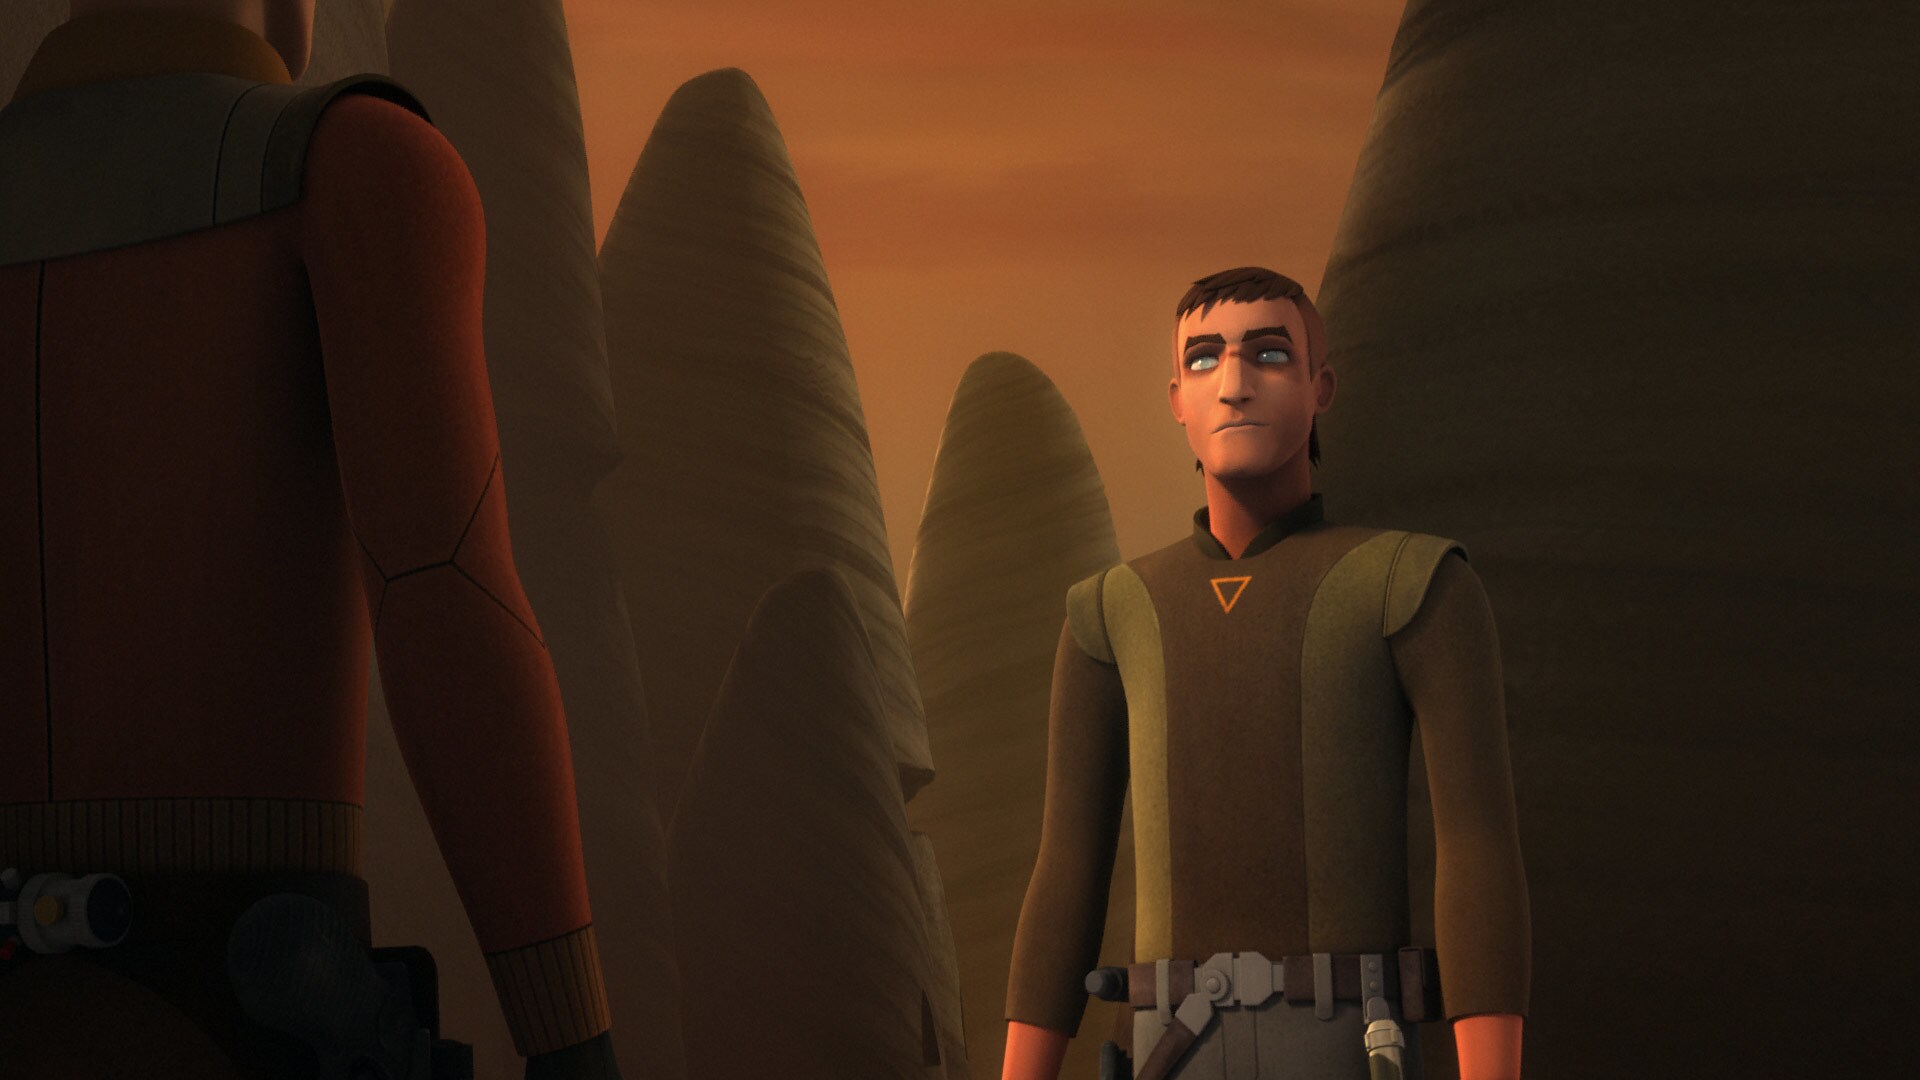 After Ezra, Sabine, Zeb, and Chopper build the gliders, Kanan emerges with a new look. He's shave...